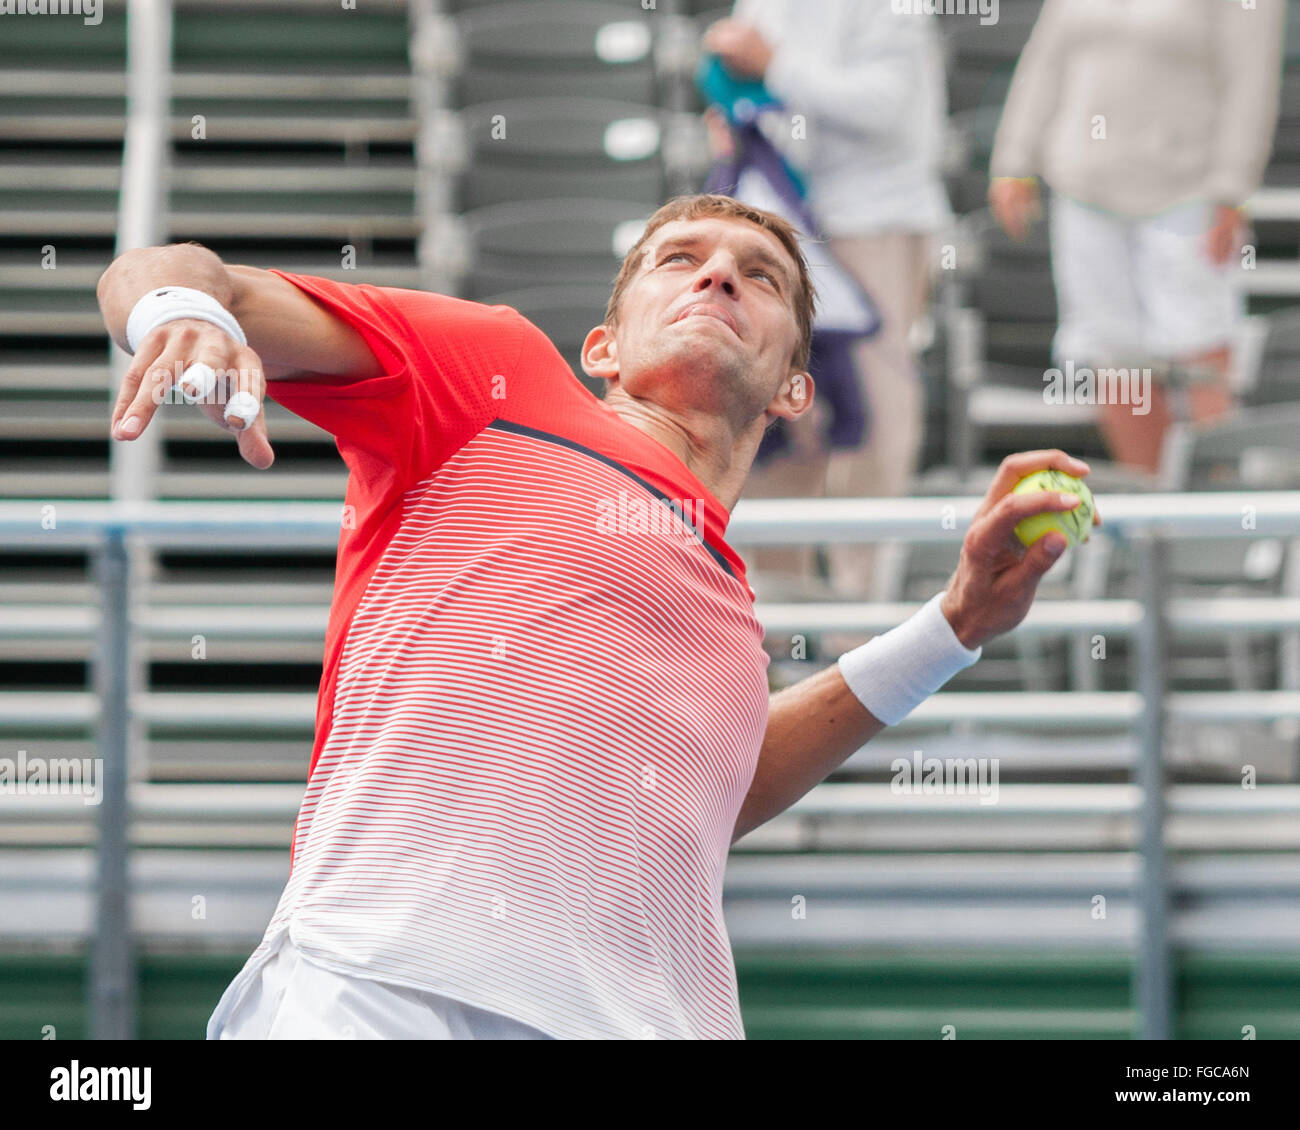 Delray Beach, Florida, US. 18th Feb, 2016. Tennis pro Belarusian MAX MIRNYI prepares to throw a tennis ball to the fans and he his doubles partner TREAT HUEY are through to the ATP World Tour Delray Beach Open semi-finals after a 6-3, 6-4 triumph over Australians Chris Guccione and Bernard Tomic. Credit:  Arnold Drapkin/ZUMA Wire/Alamy Live News Stock Photo